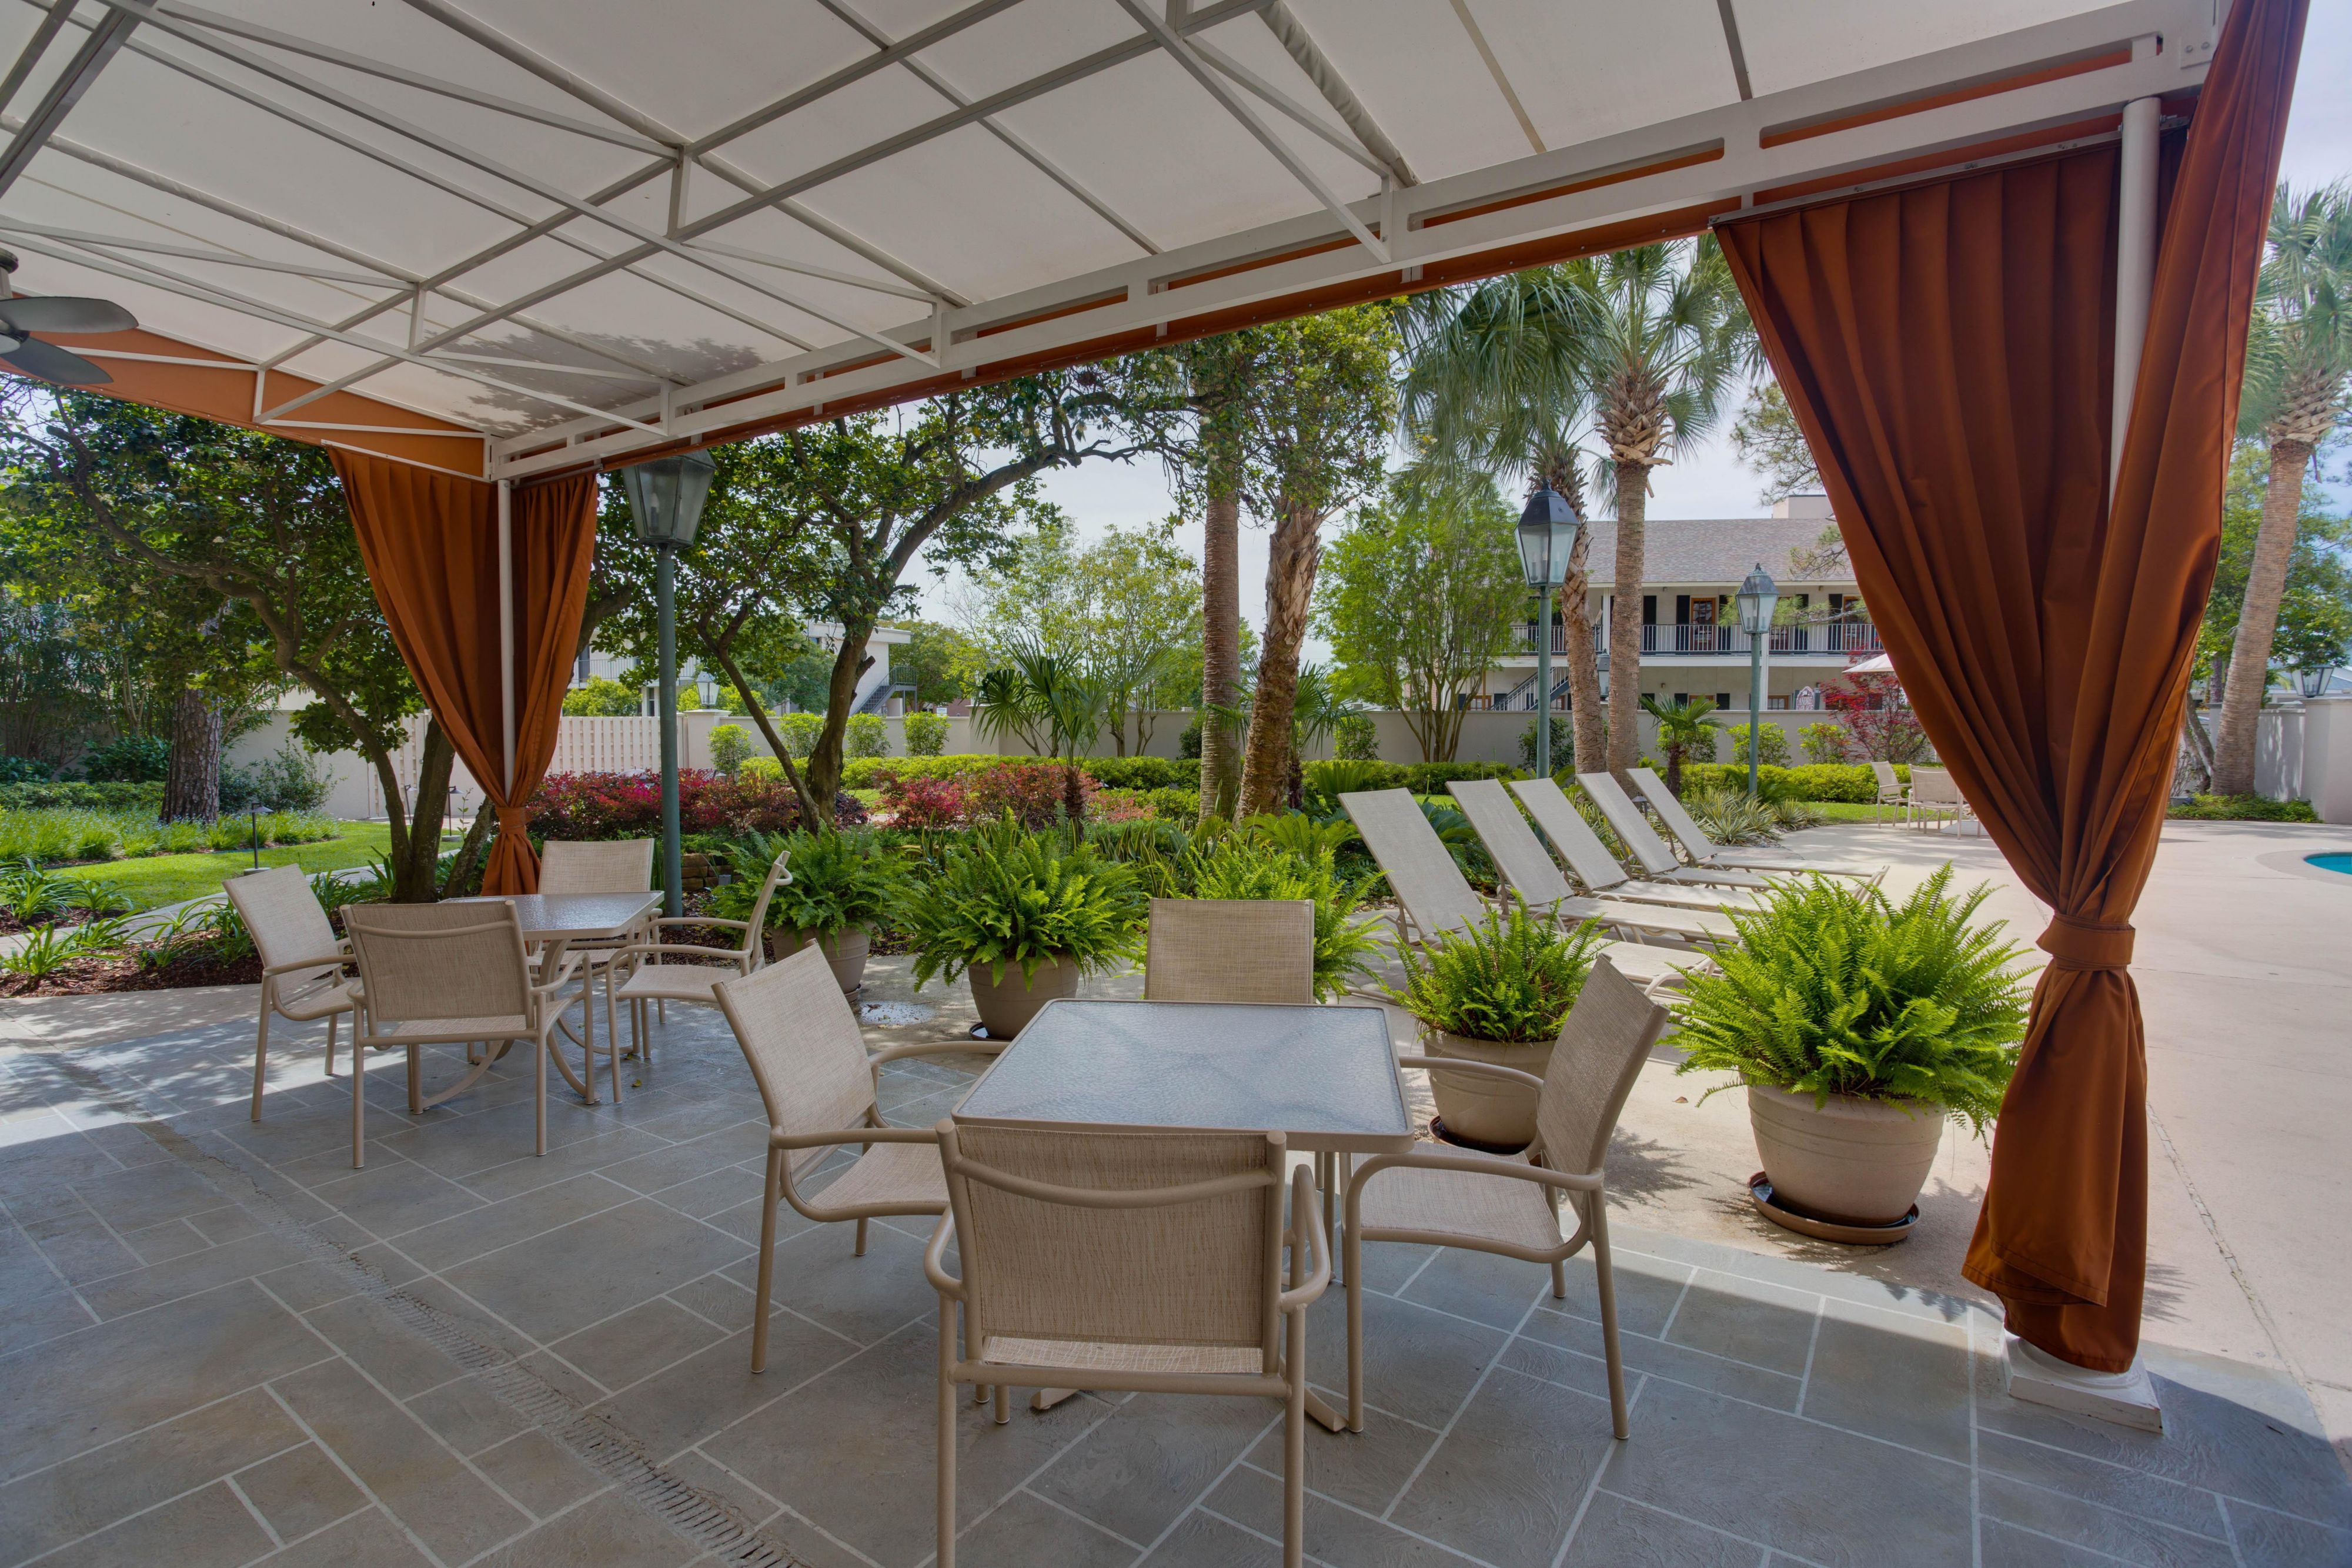 Enjoy the outdoors at our courtyard patio